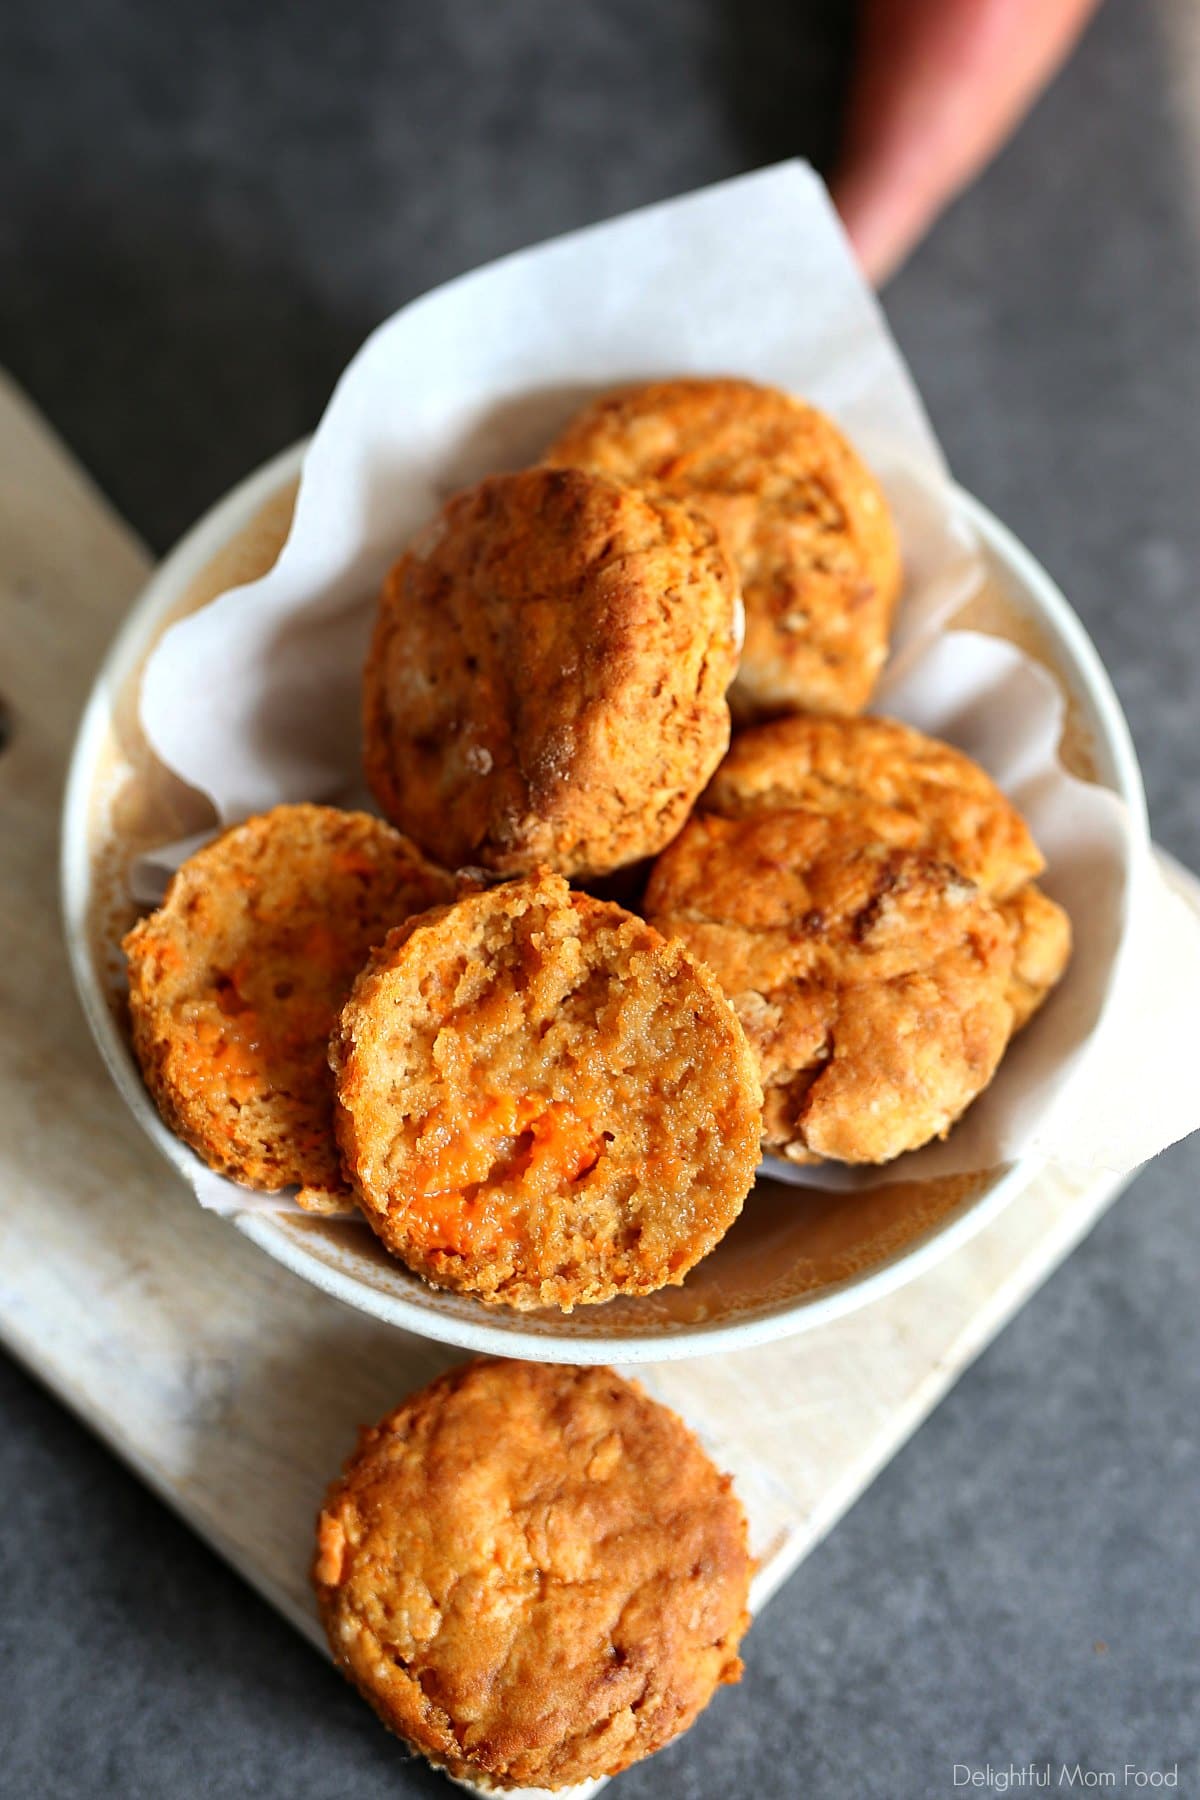 Vegan gluten-free biscuits made out of sweet potatoes.